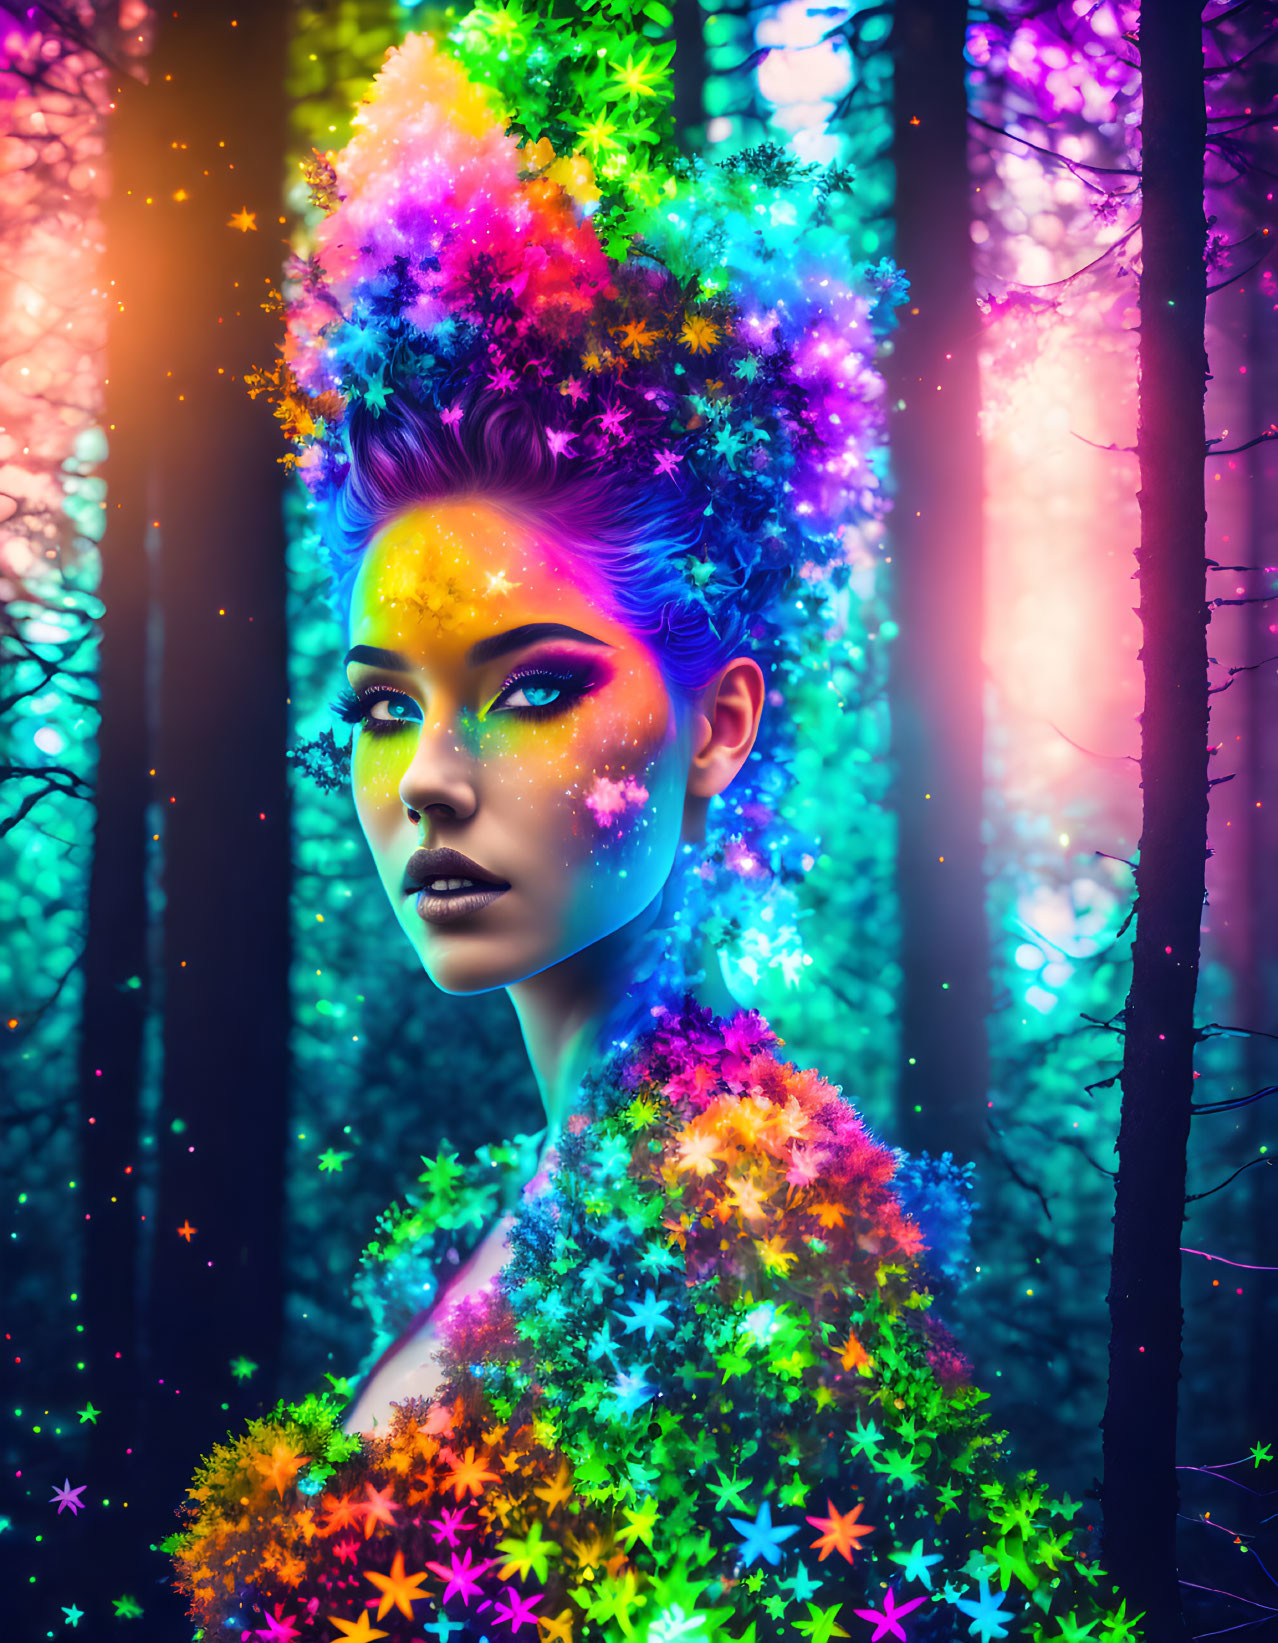 Colorful woman portrait with neon body paint and luminescent flowers in mystical forest.